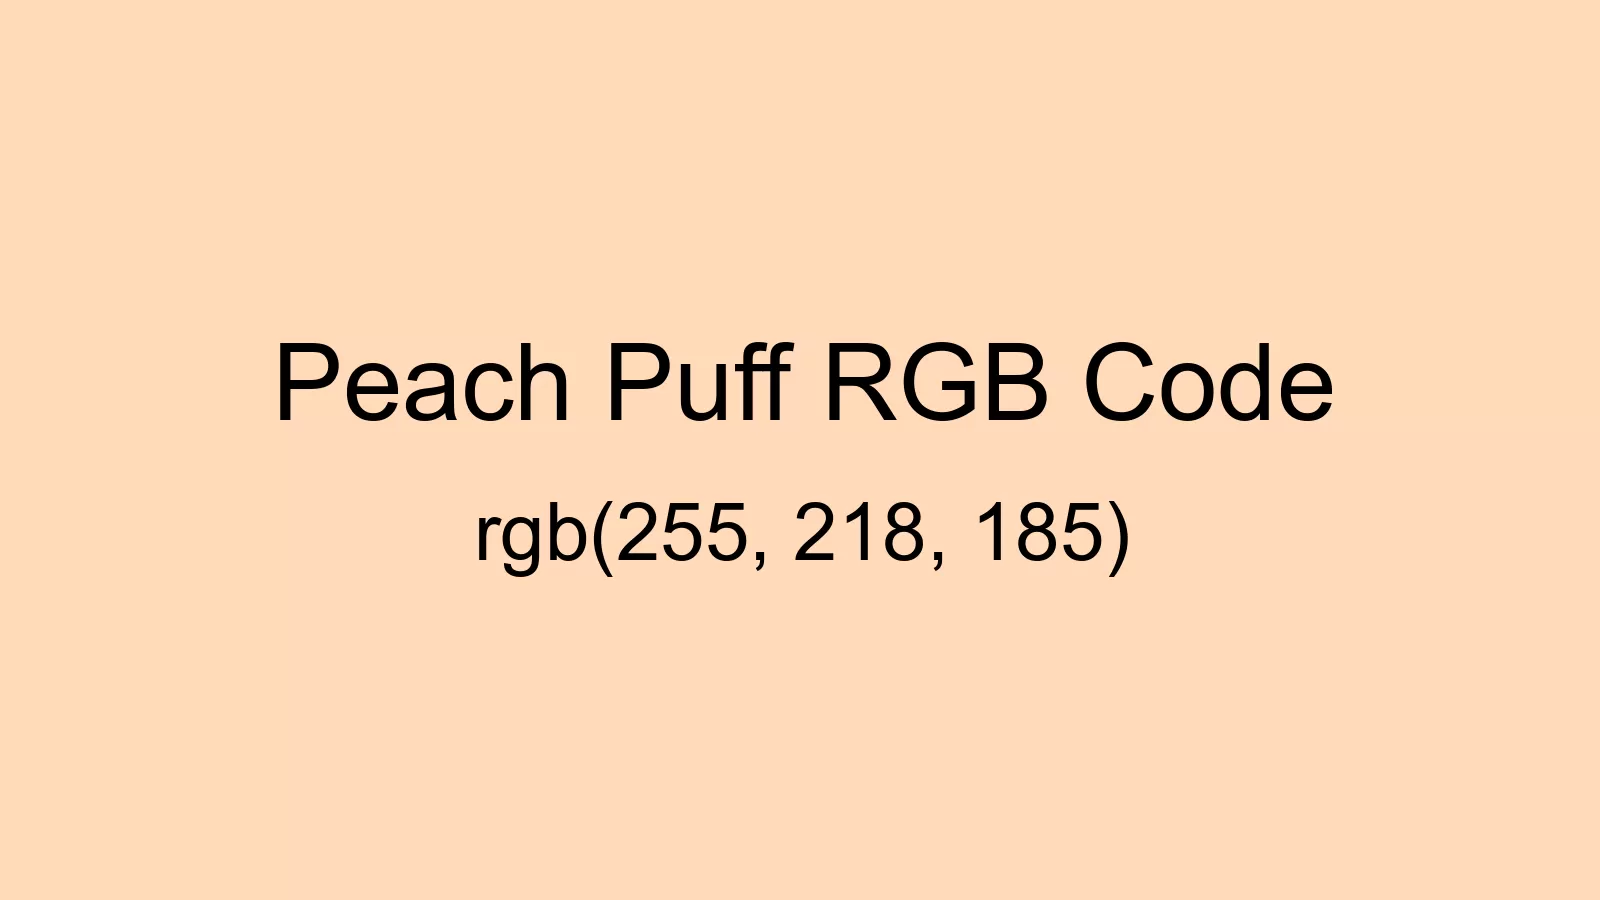 preview image of Peach Puff color and RGB code